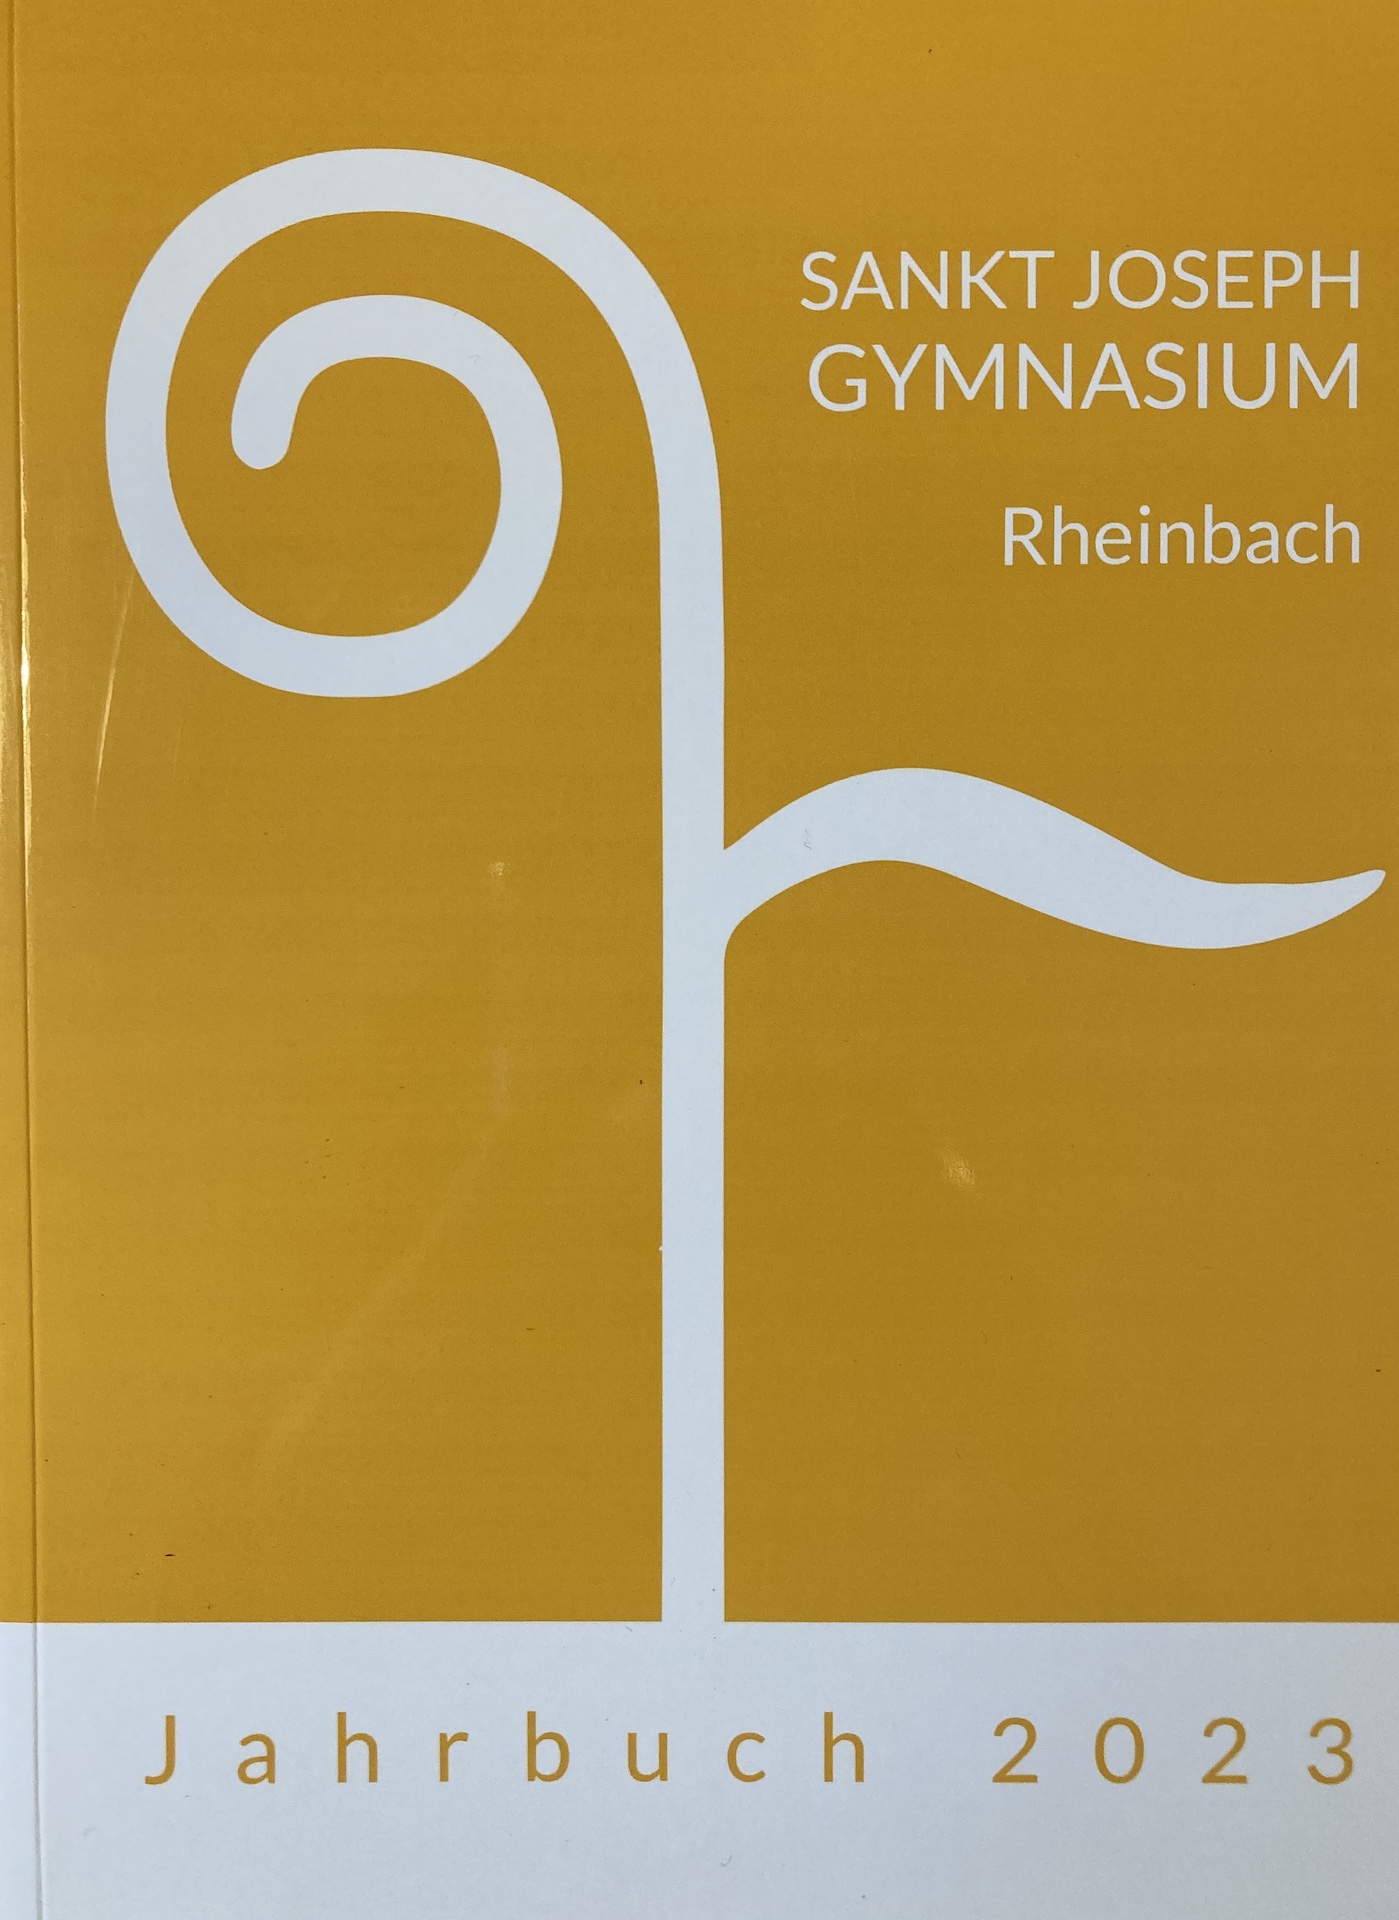 Jahrbuch-Cover 2023 in gelb